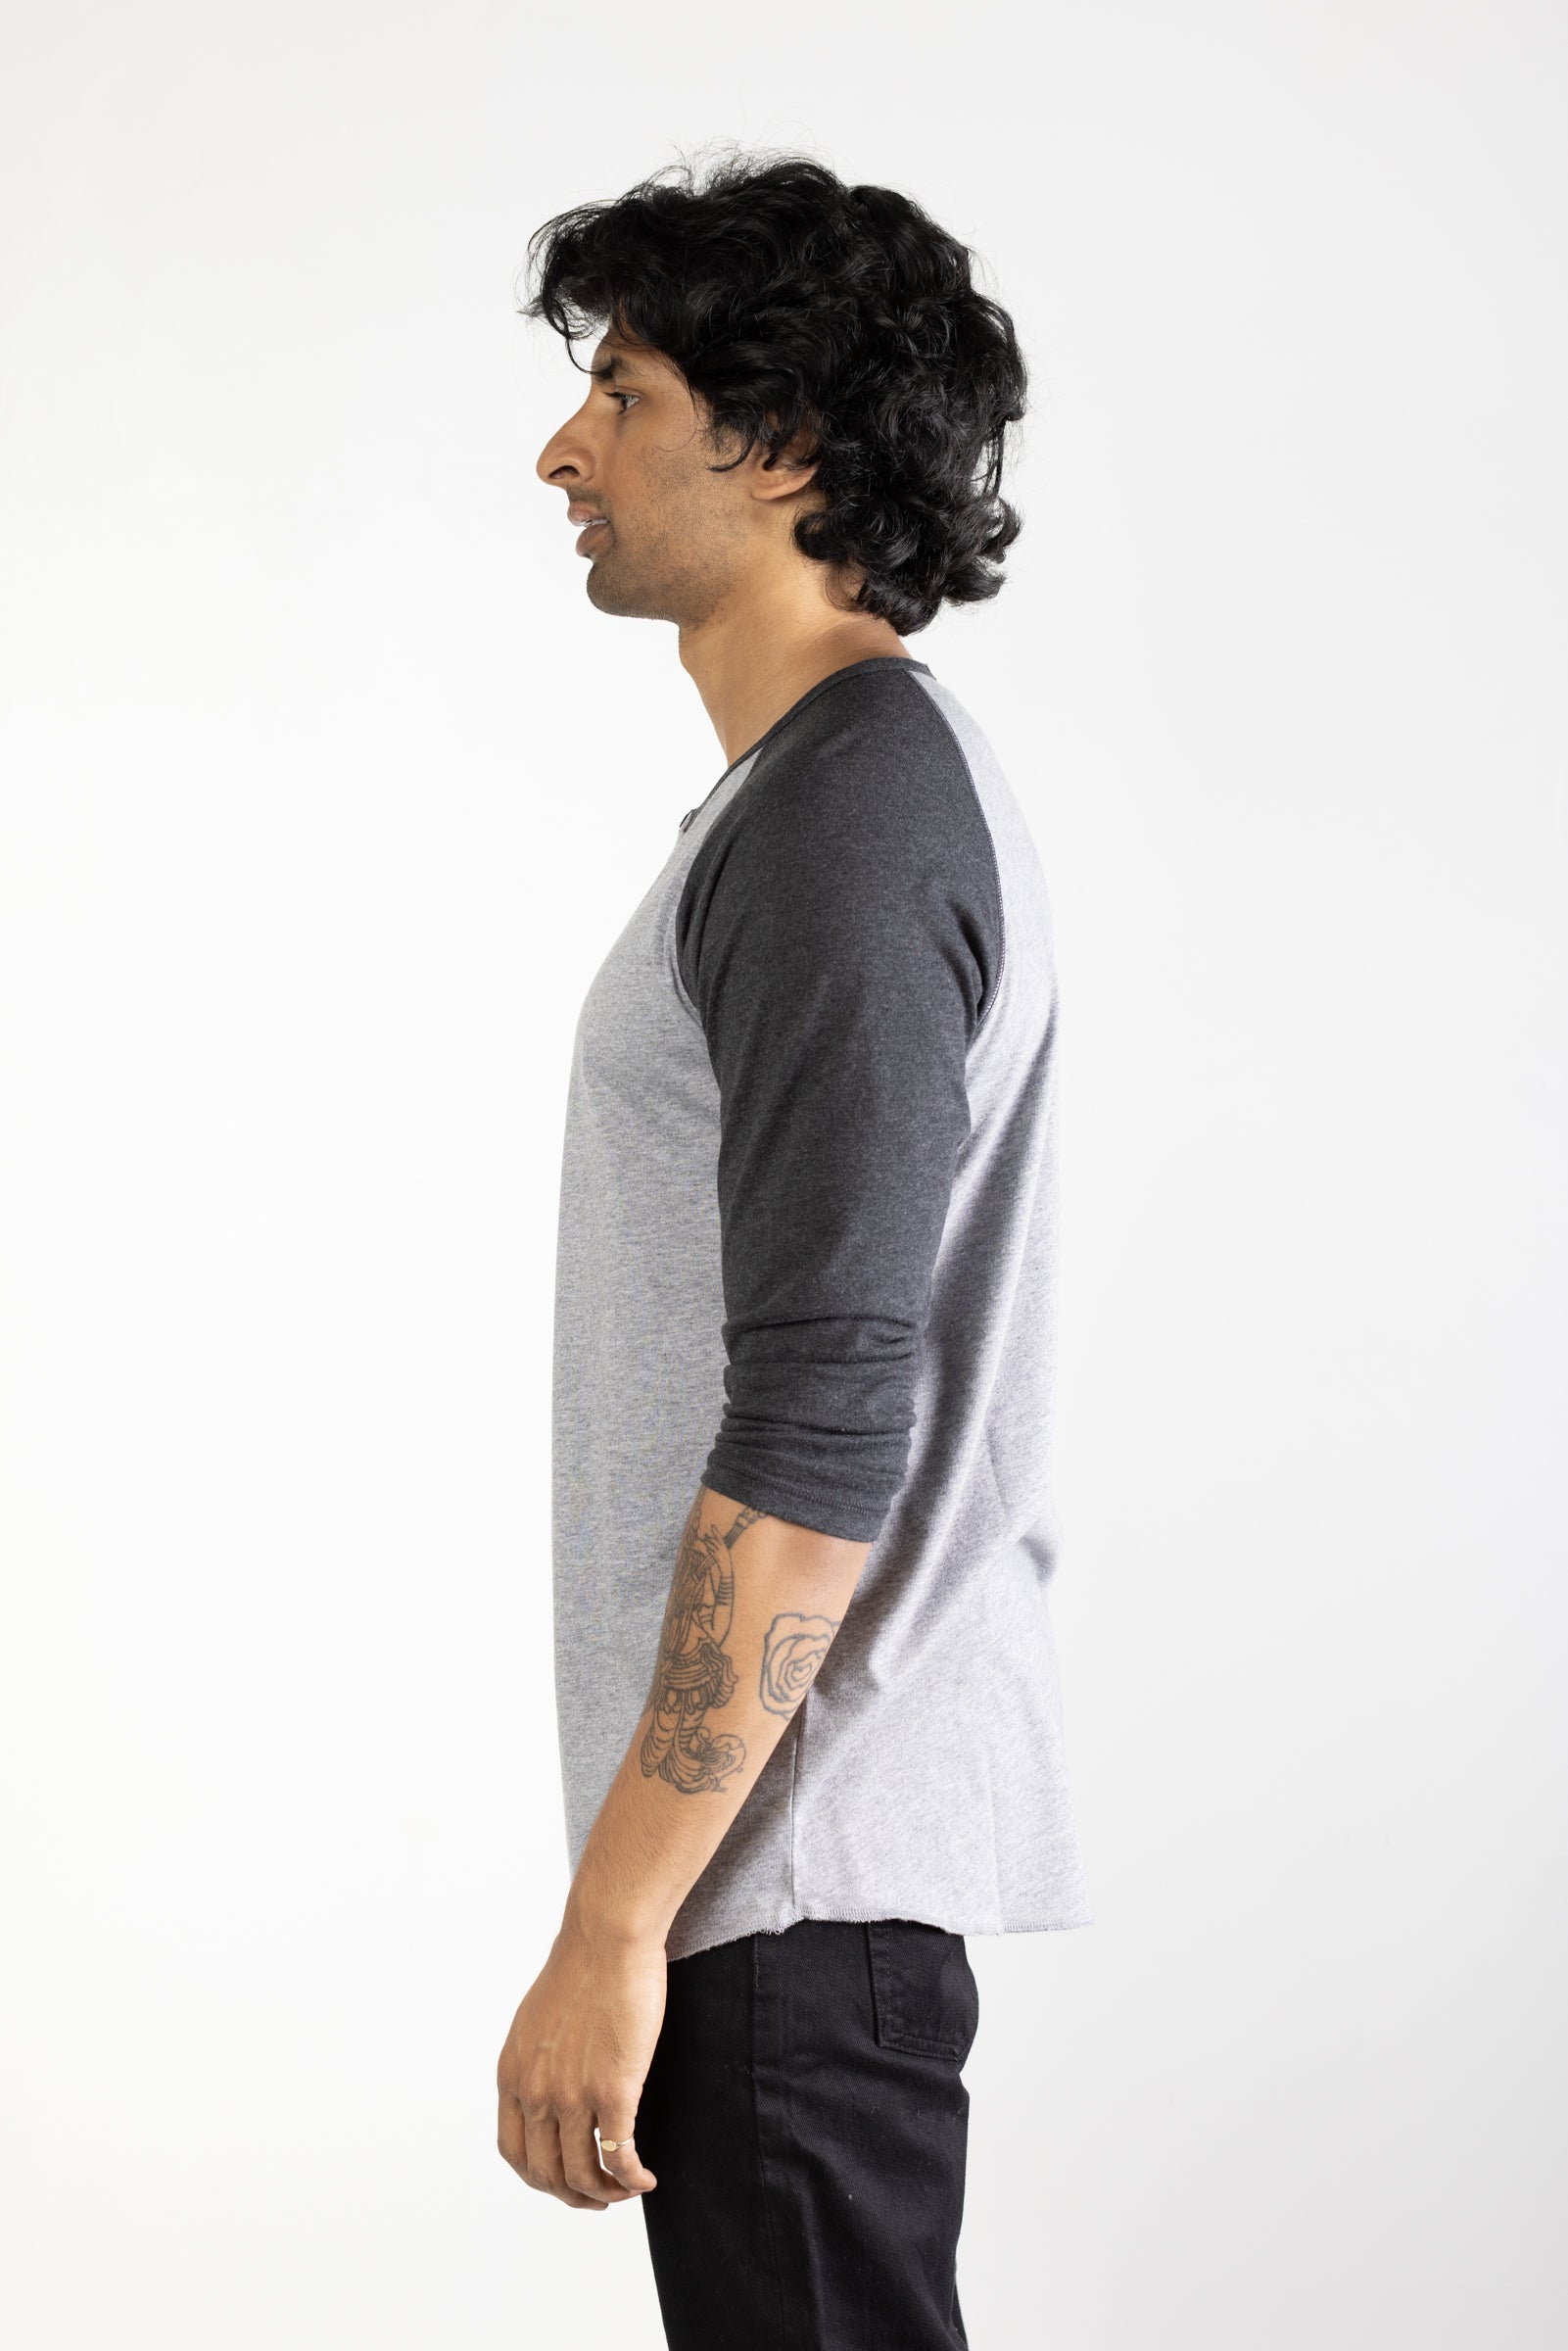 NS2122-9 Tri-blend 3/4 henley in Grey with Charcoal sleeves 03